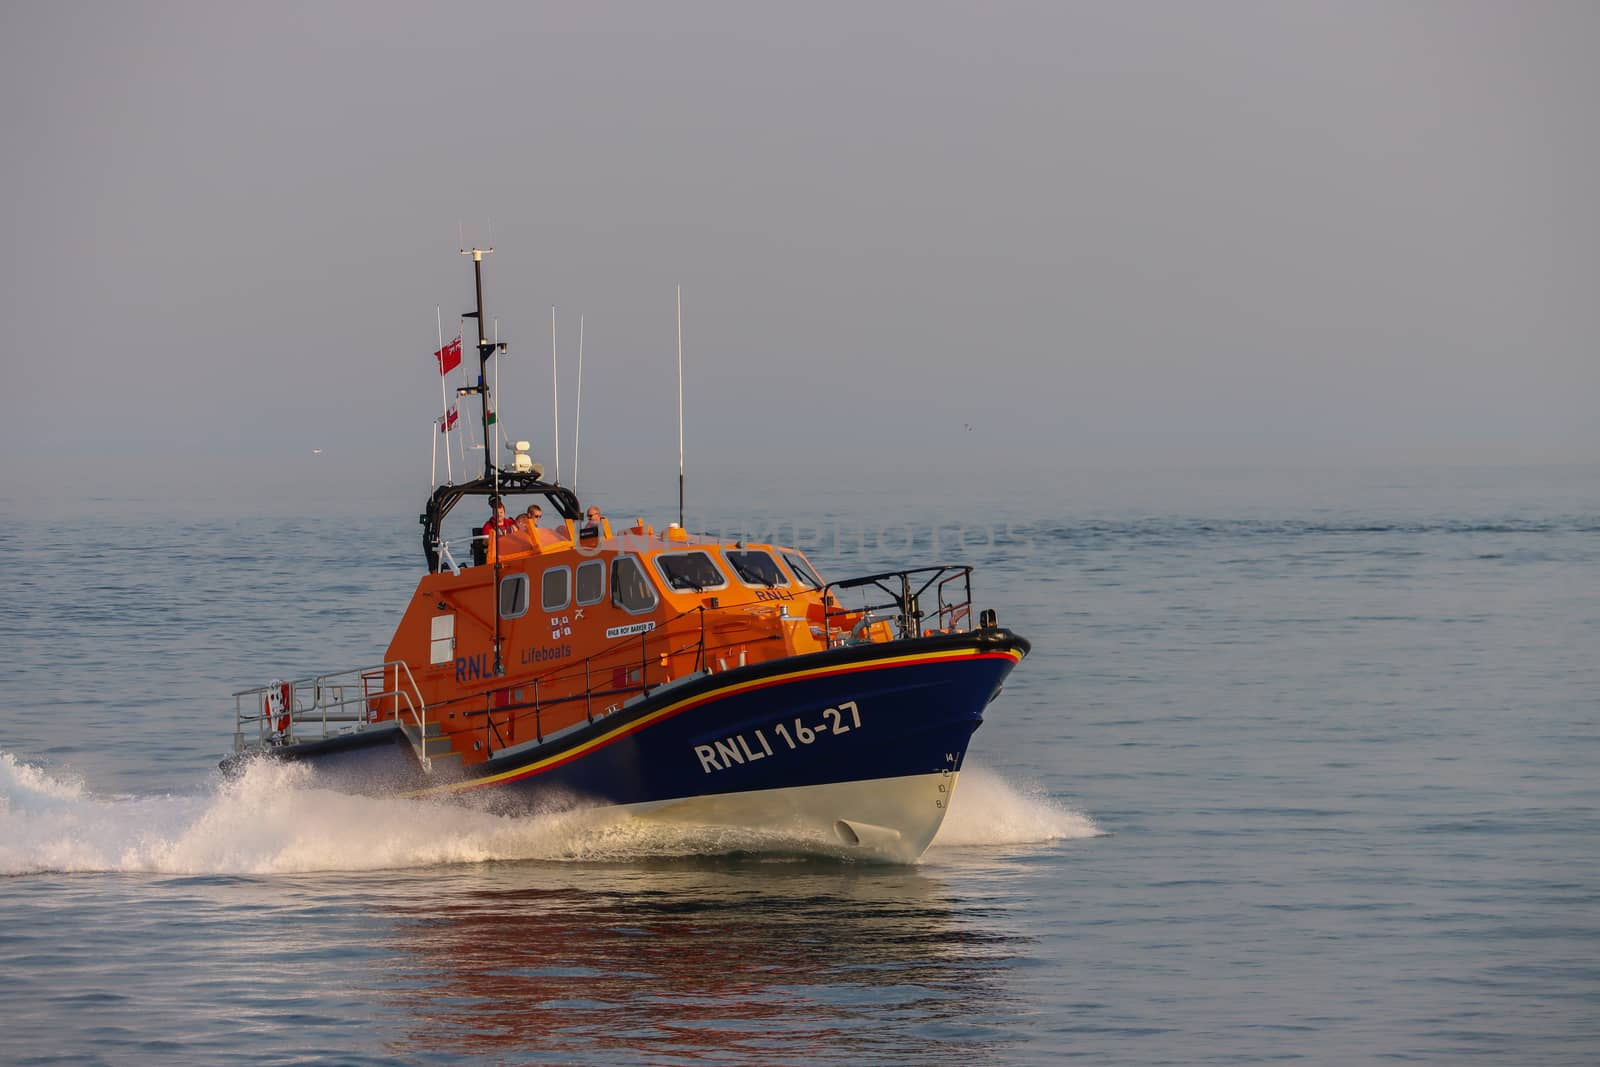 RNLI Lifeboat On The Ocean by WCLUK